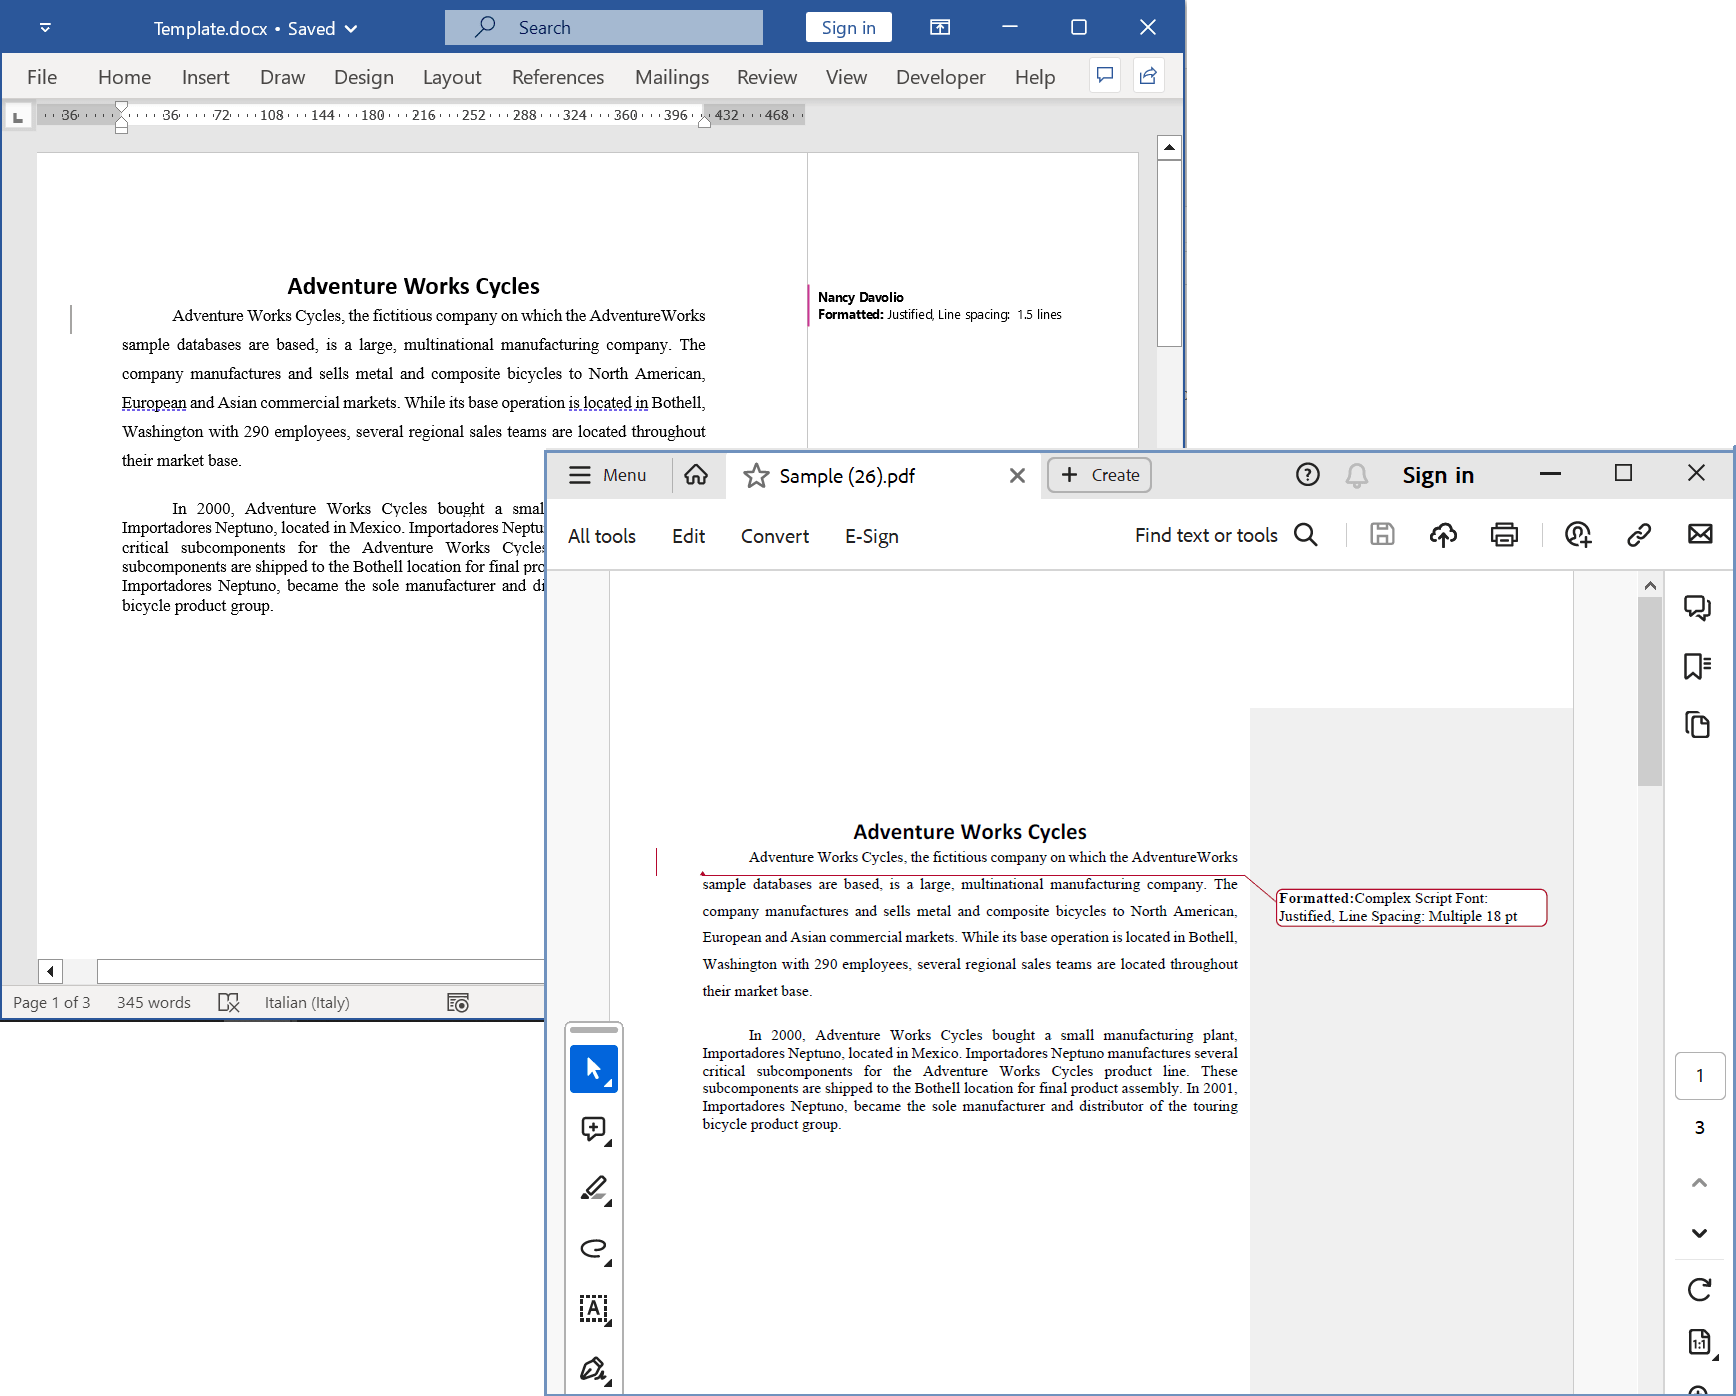 Output of all markup in Word to PDF conversion in C#